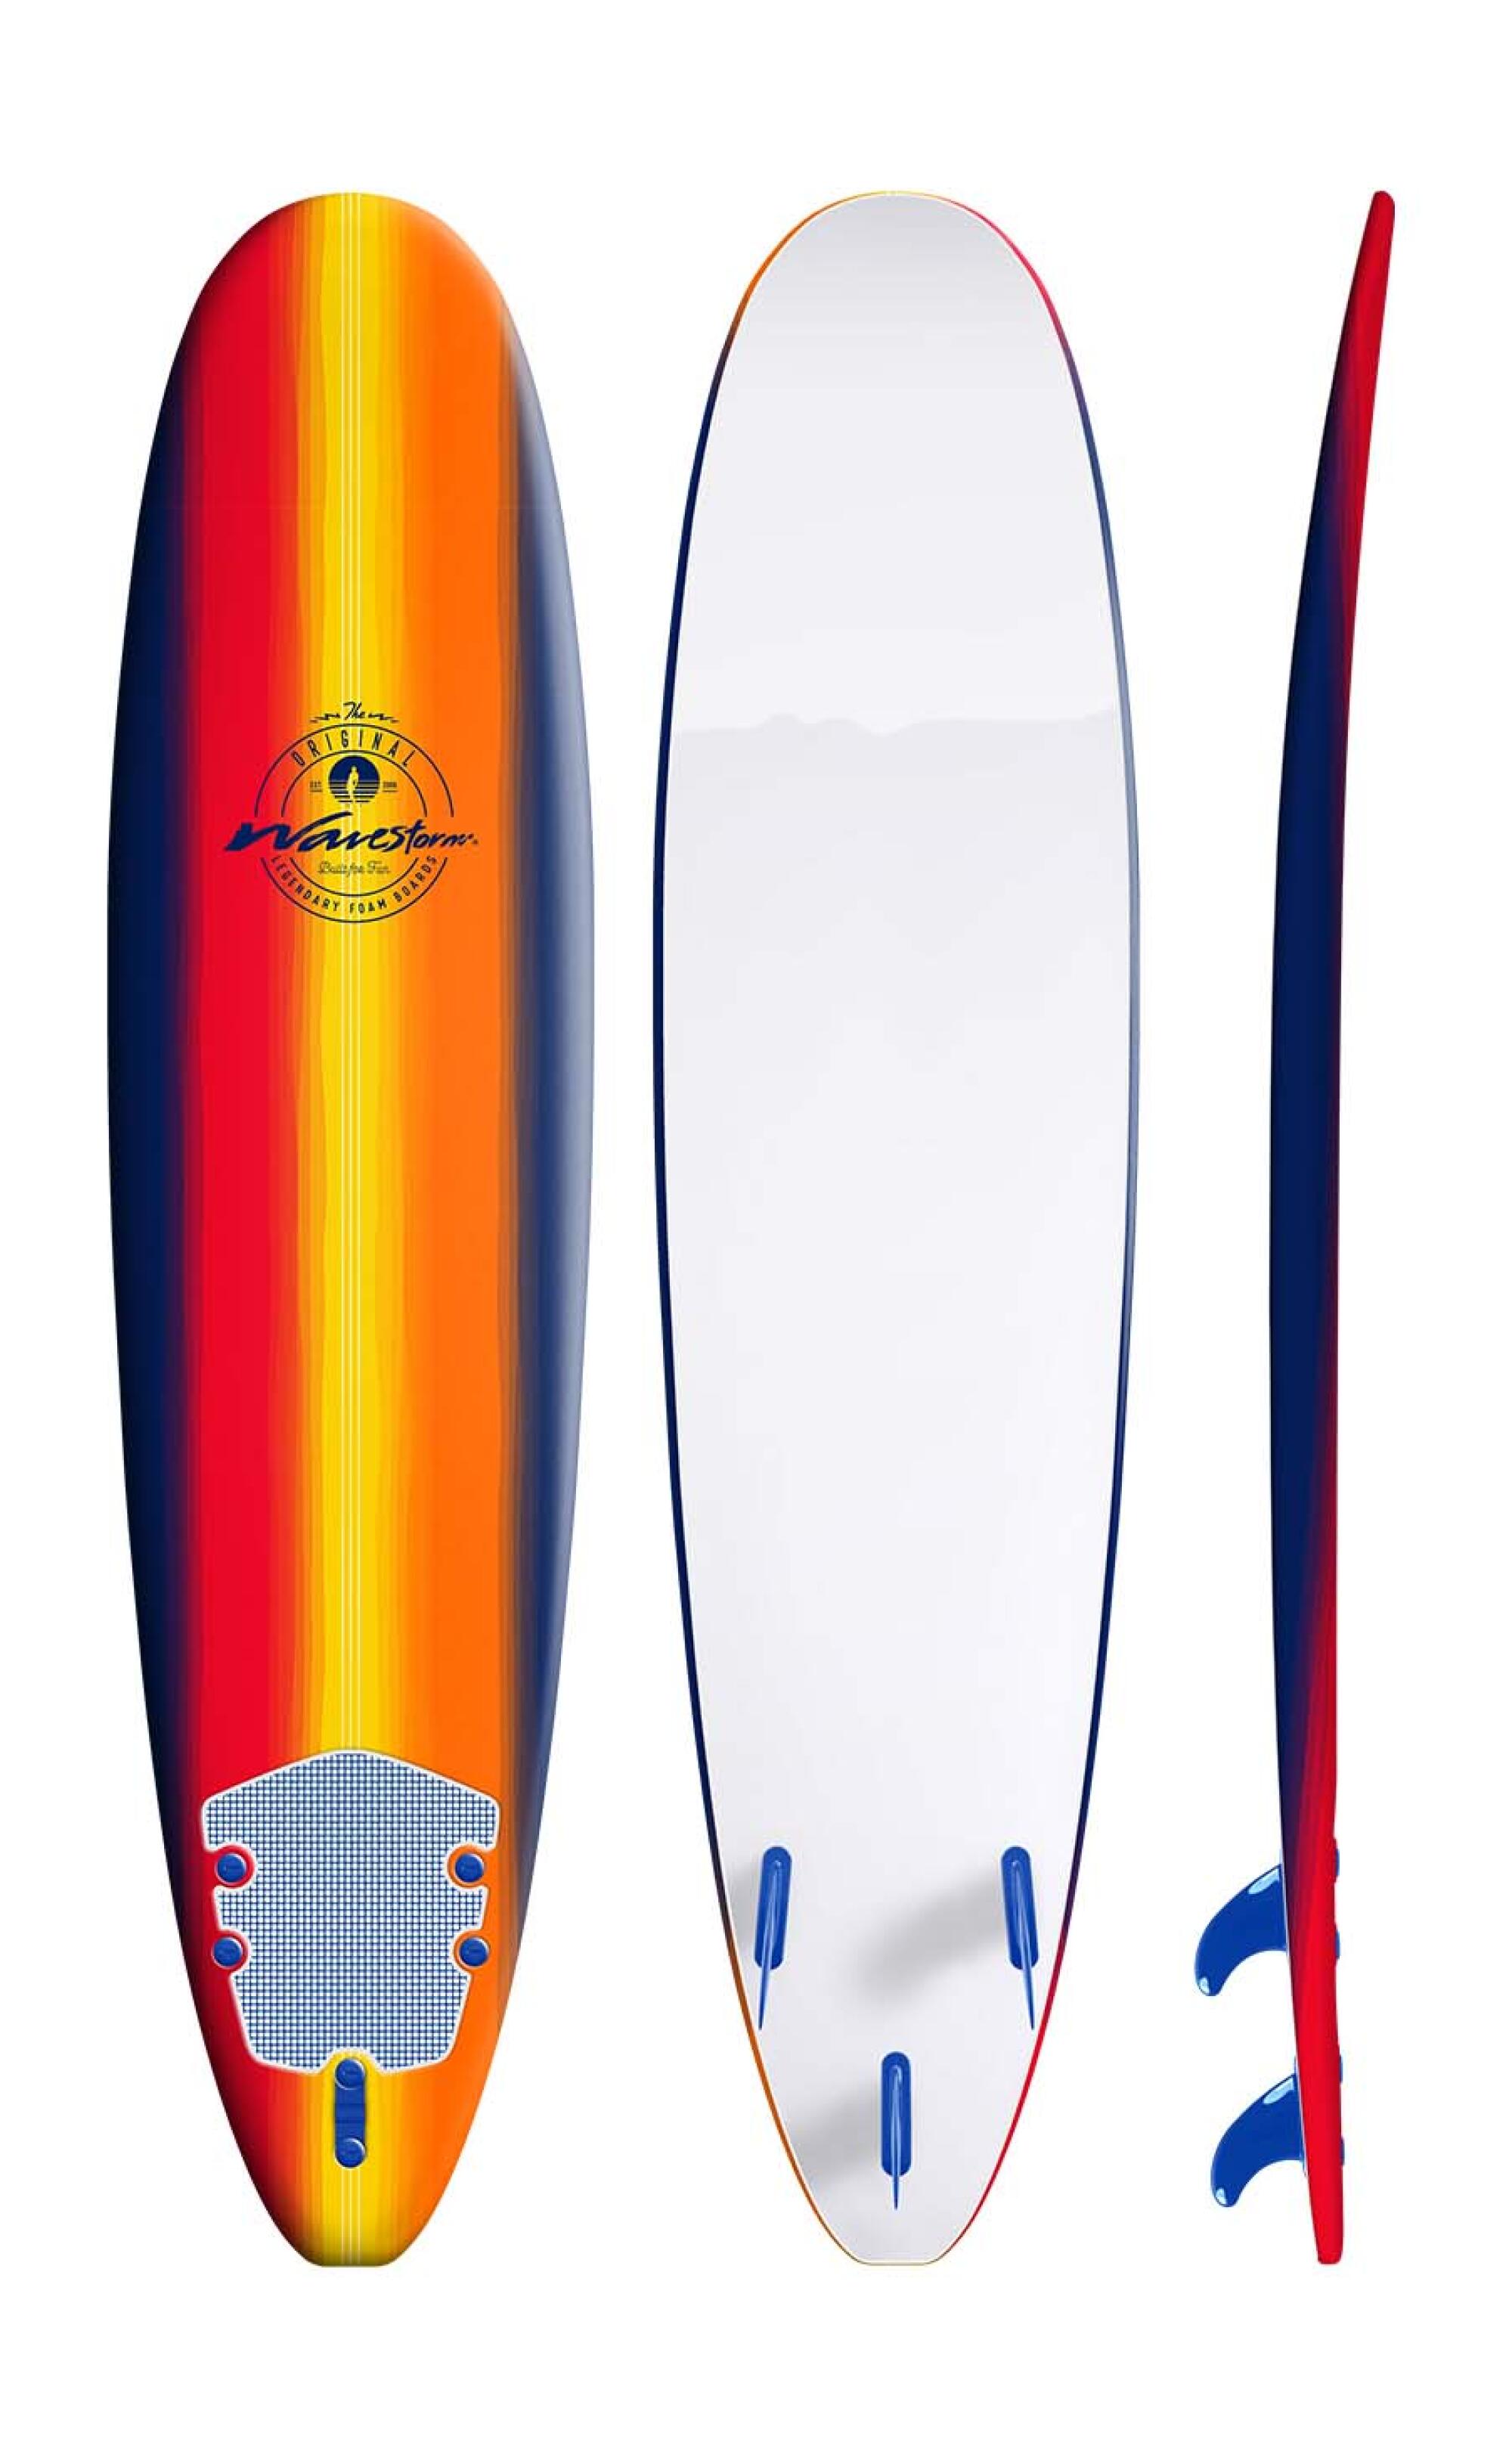 Different views of a soft-top surfboard.